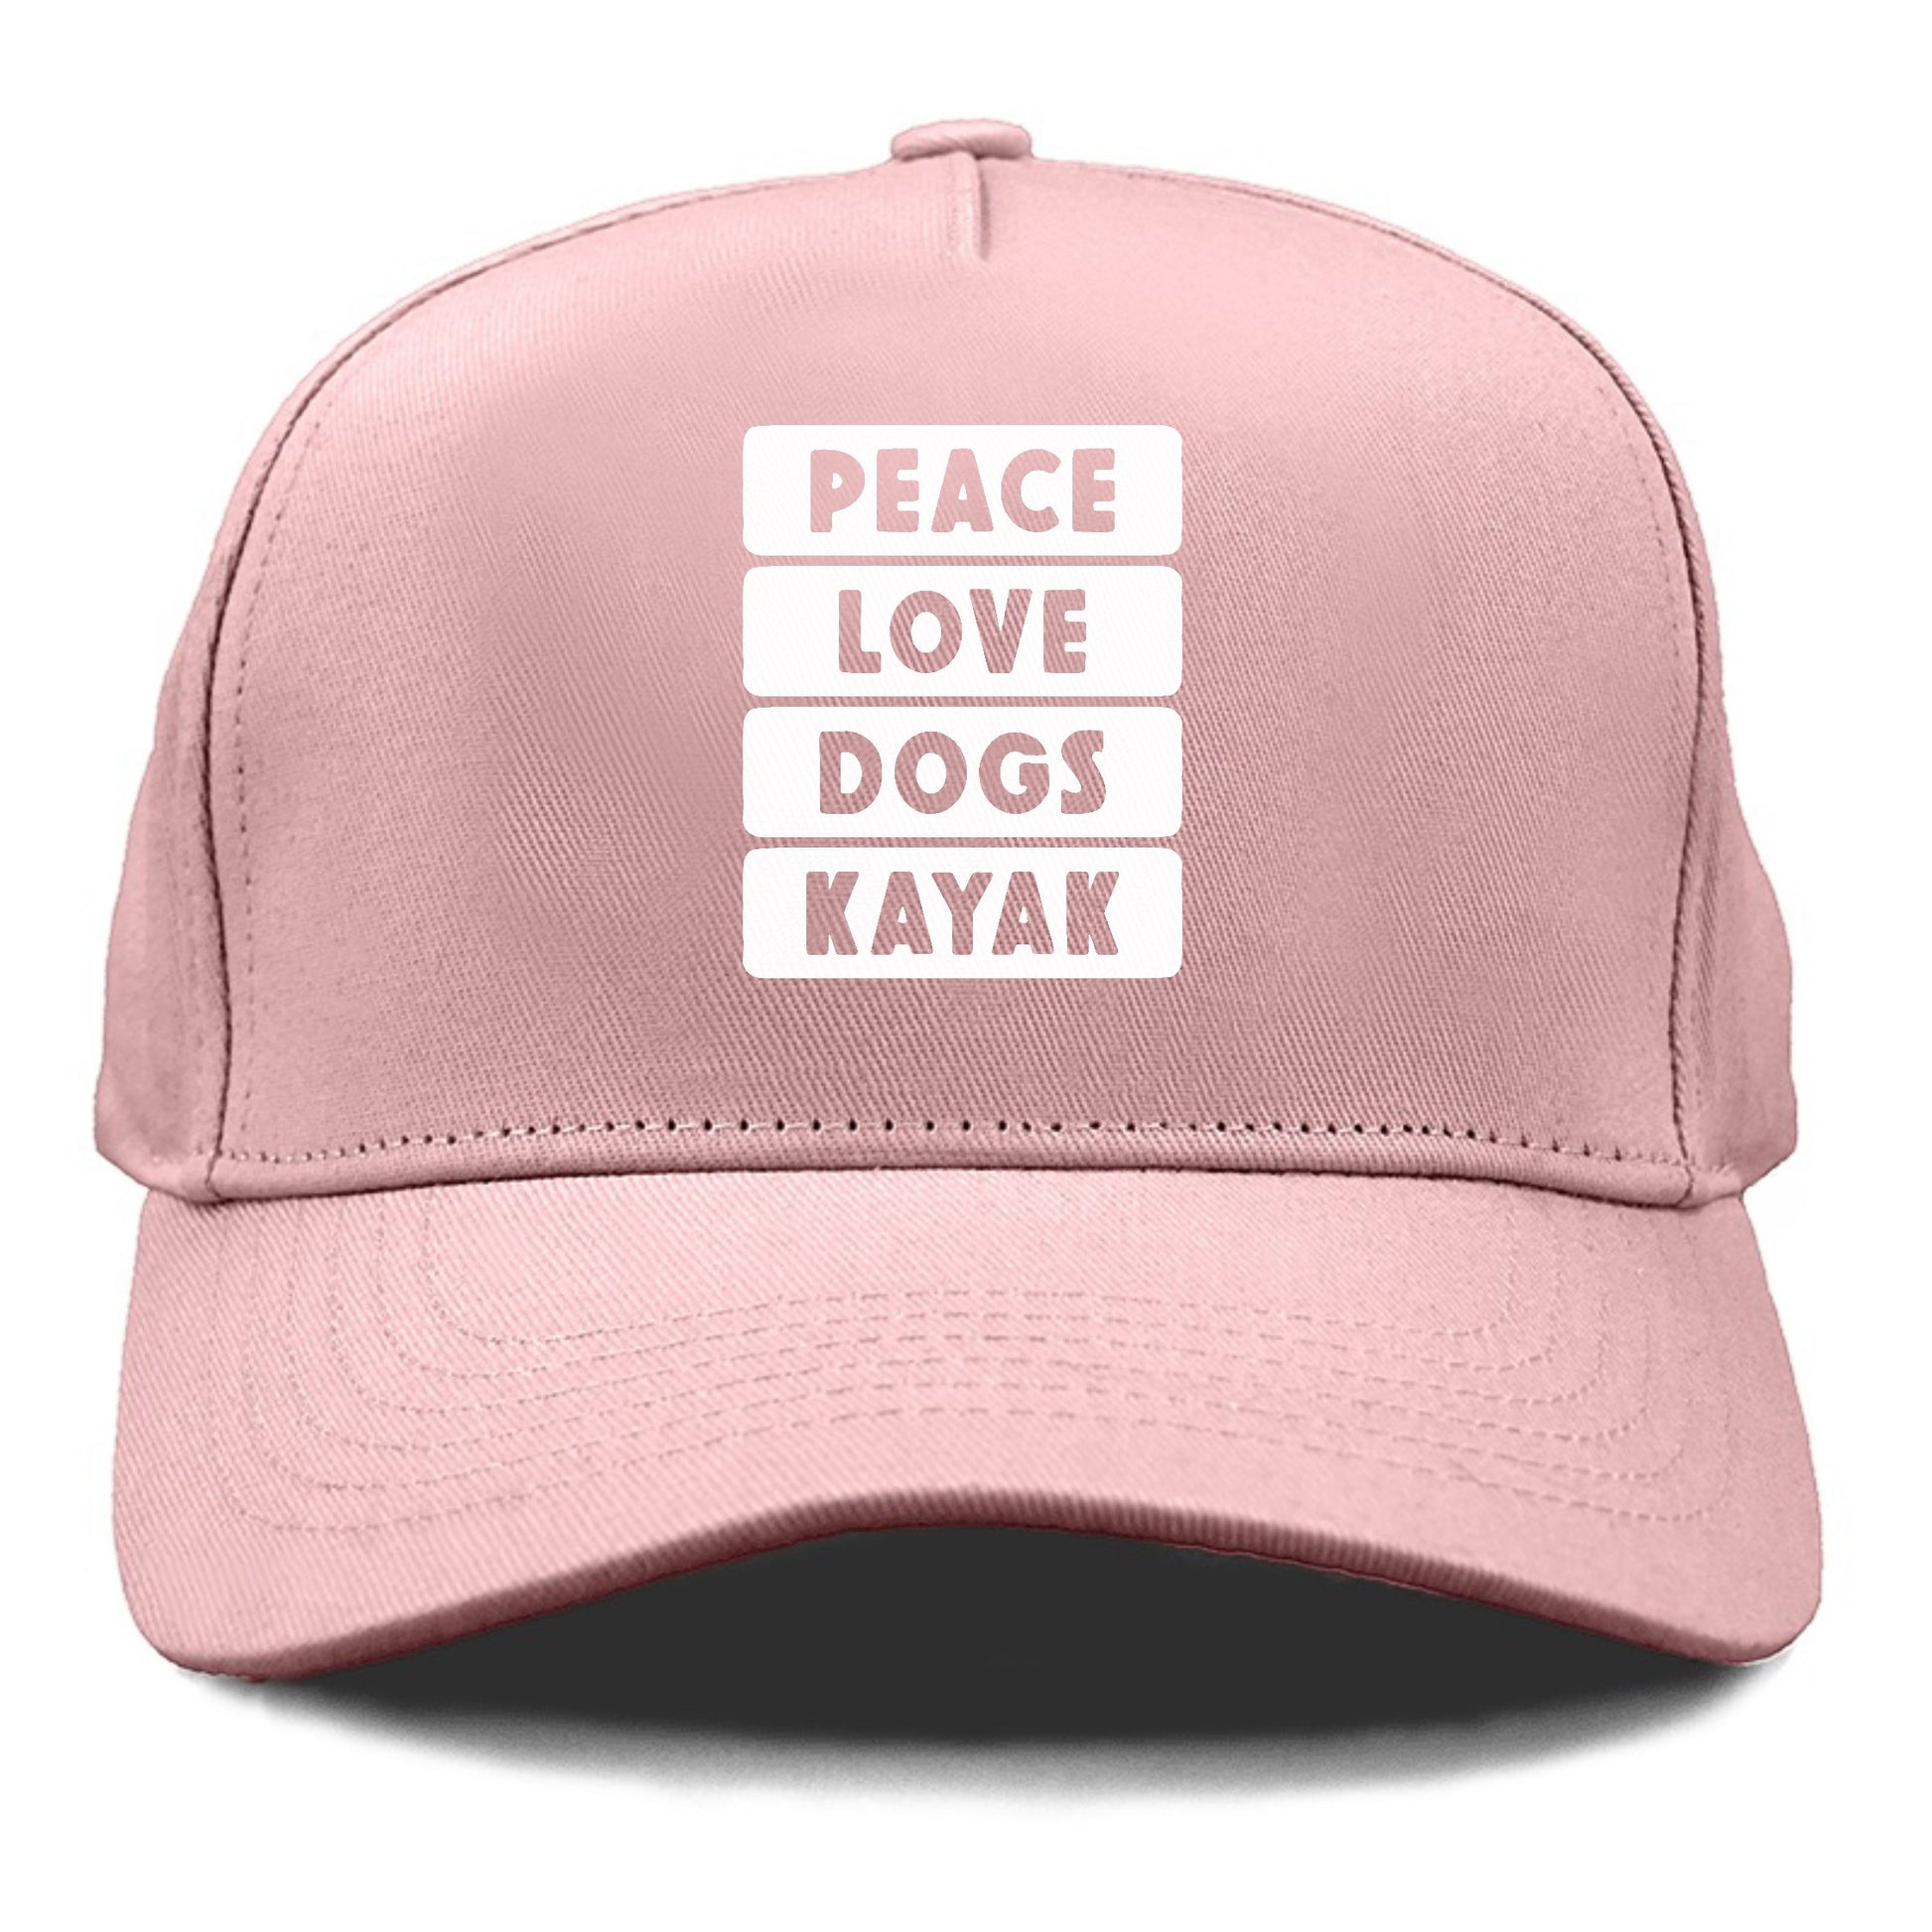 peace love dogs kayak classic Hat